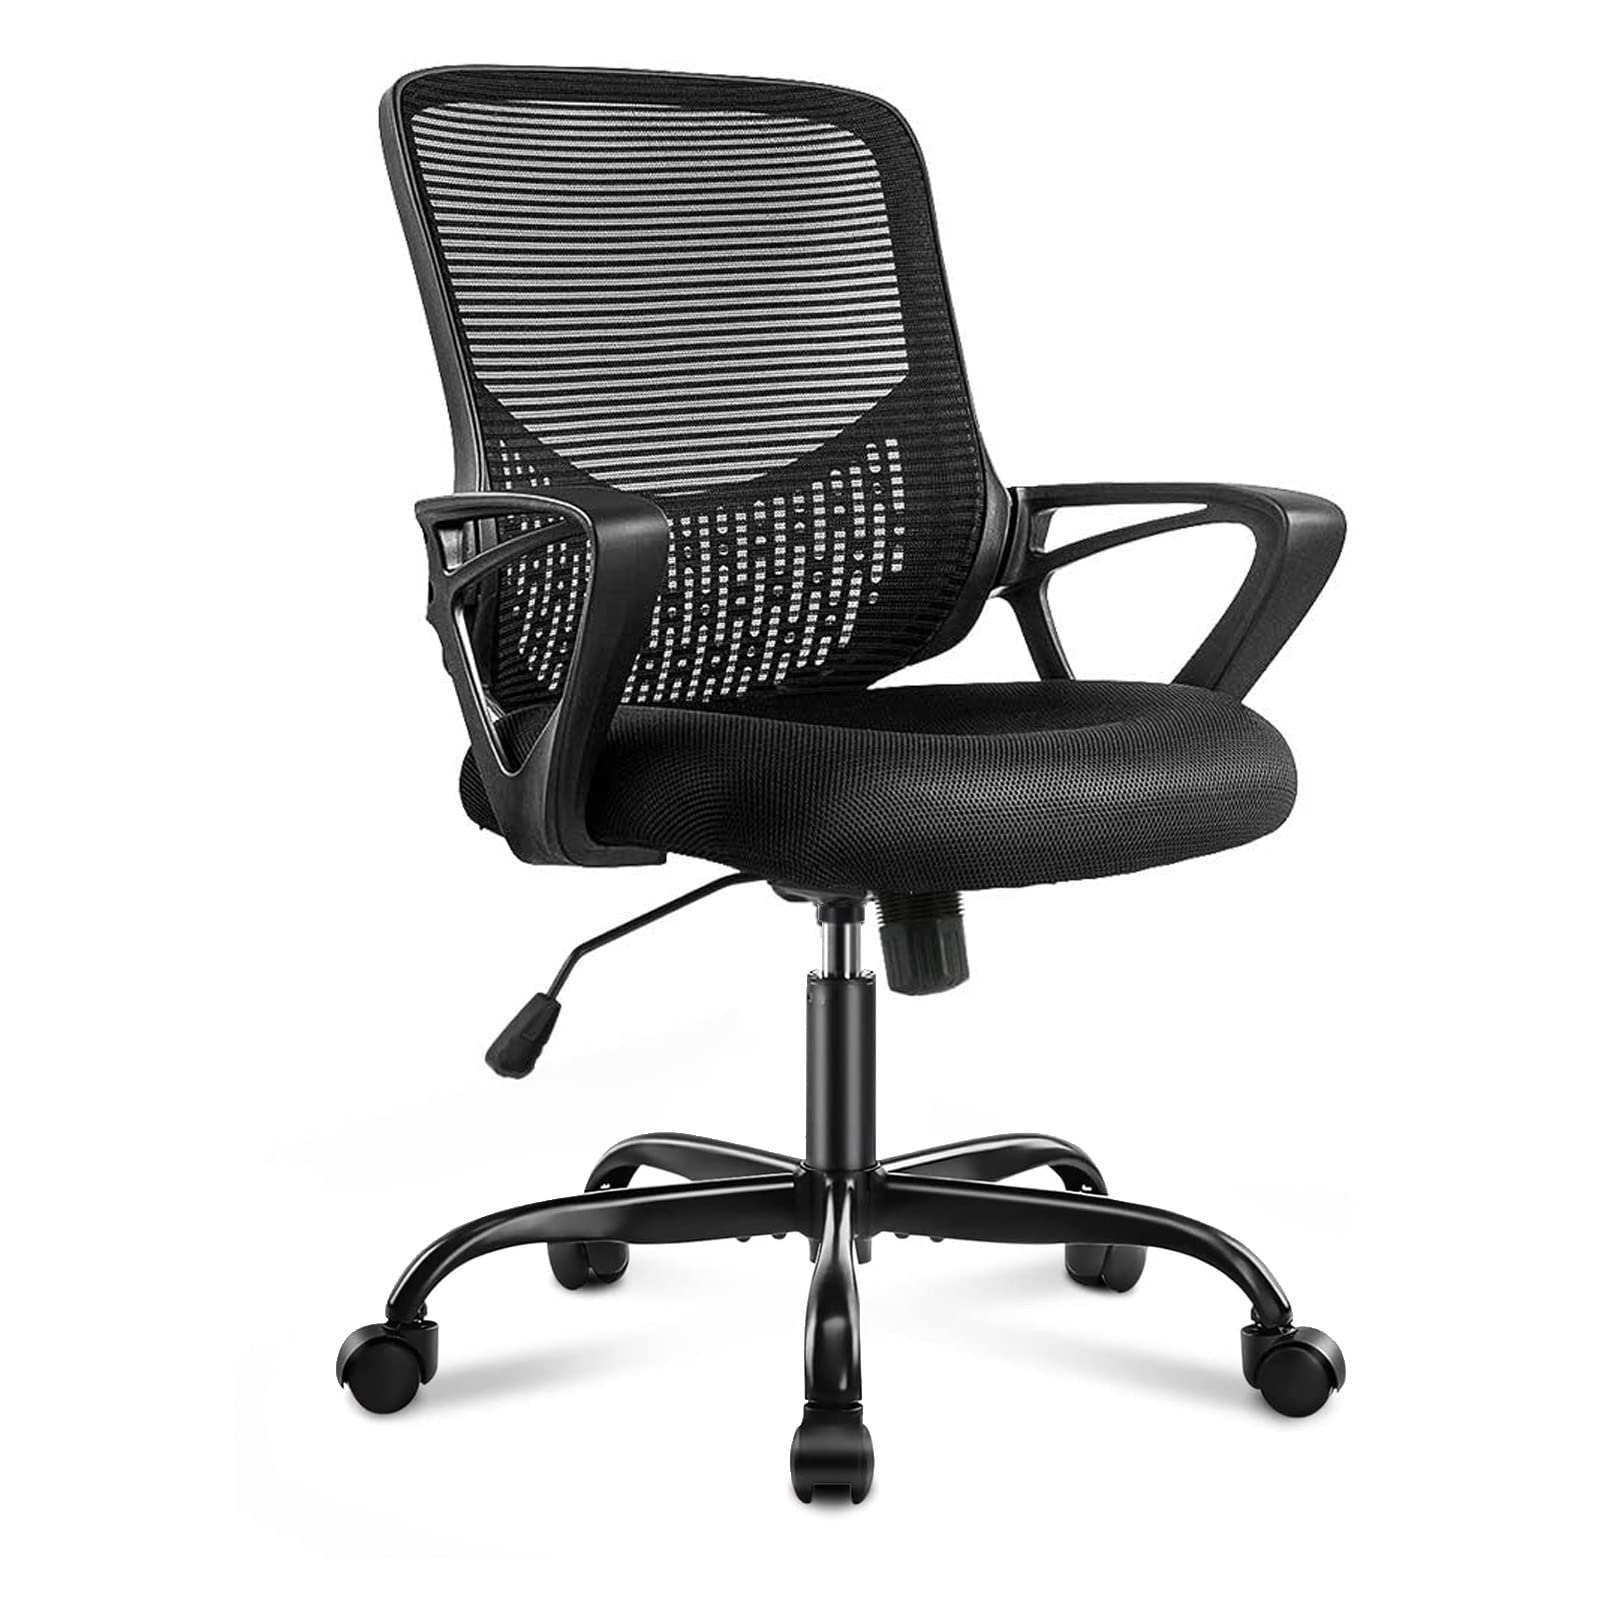 SMUG Office Chair, Desk Chair Mid Back Computer Chair